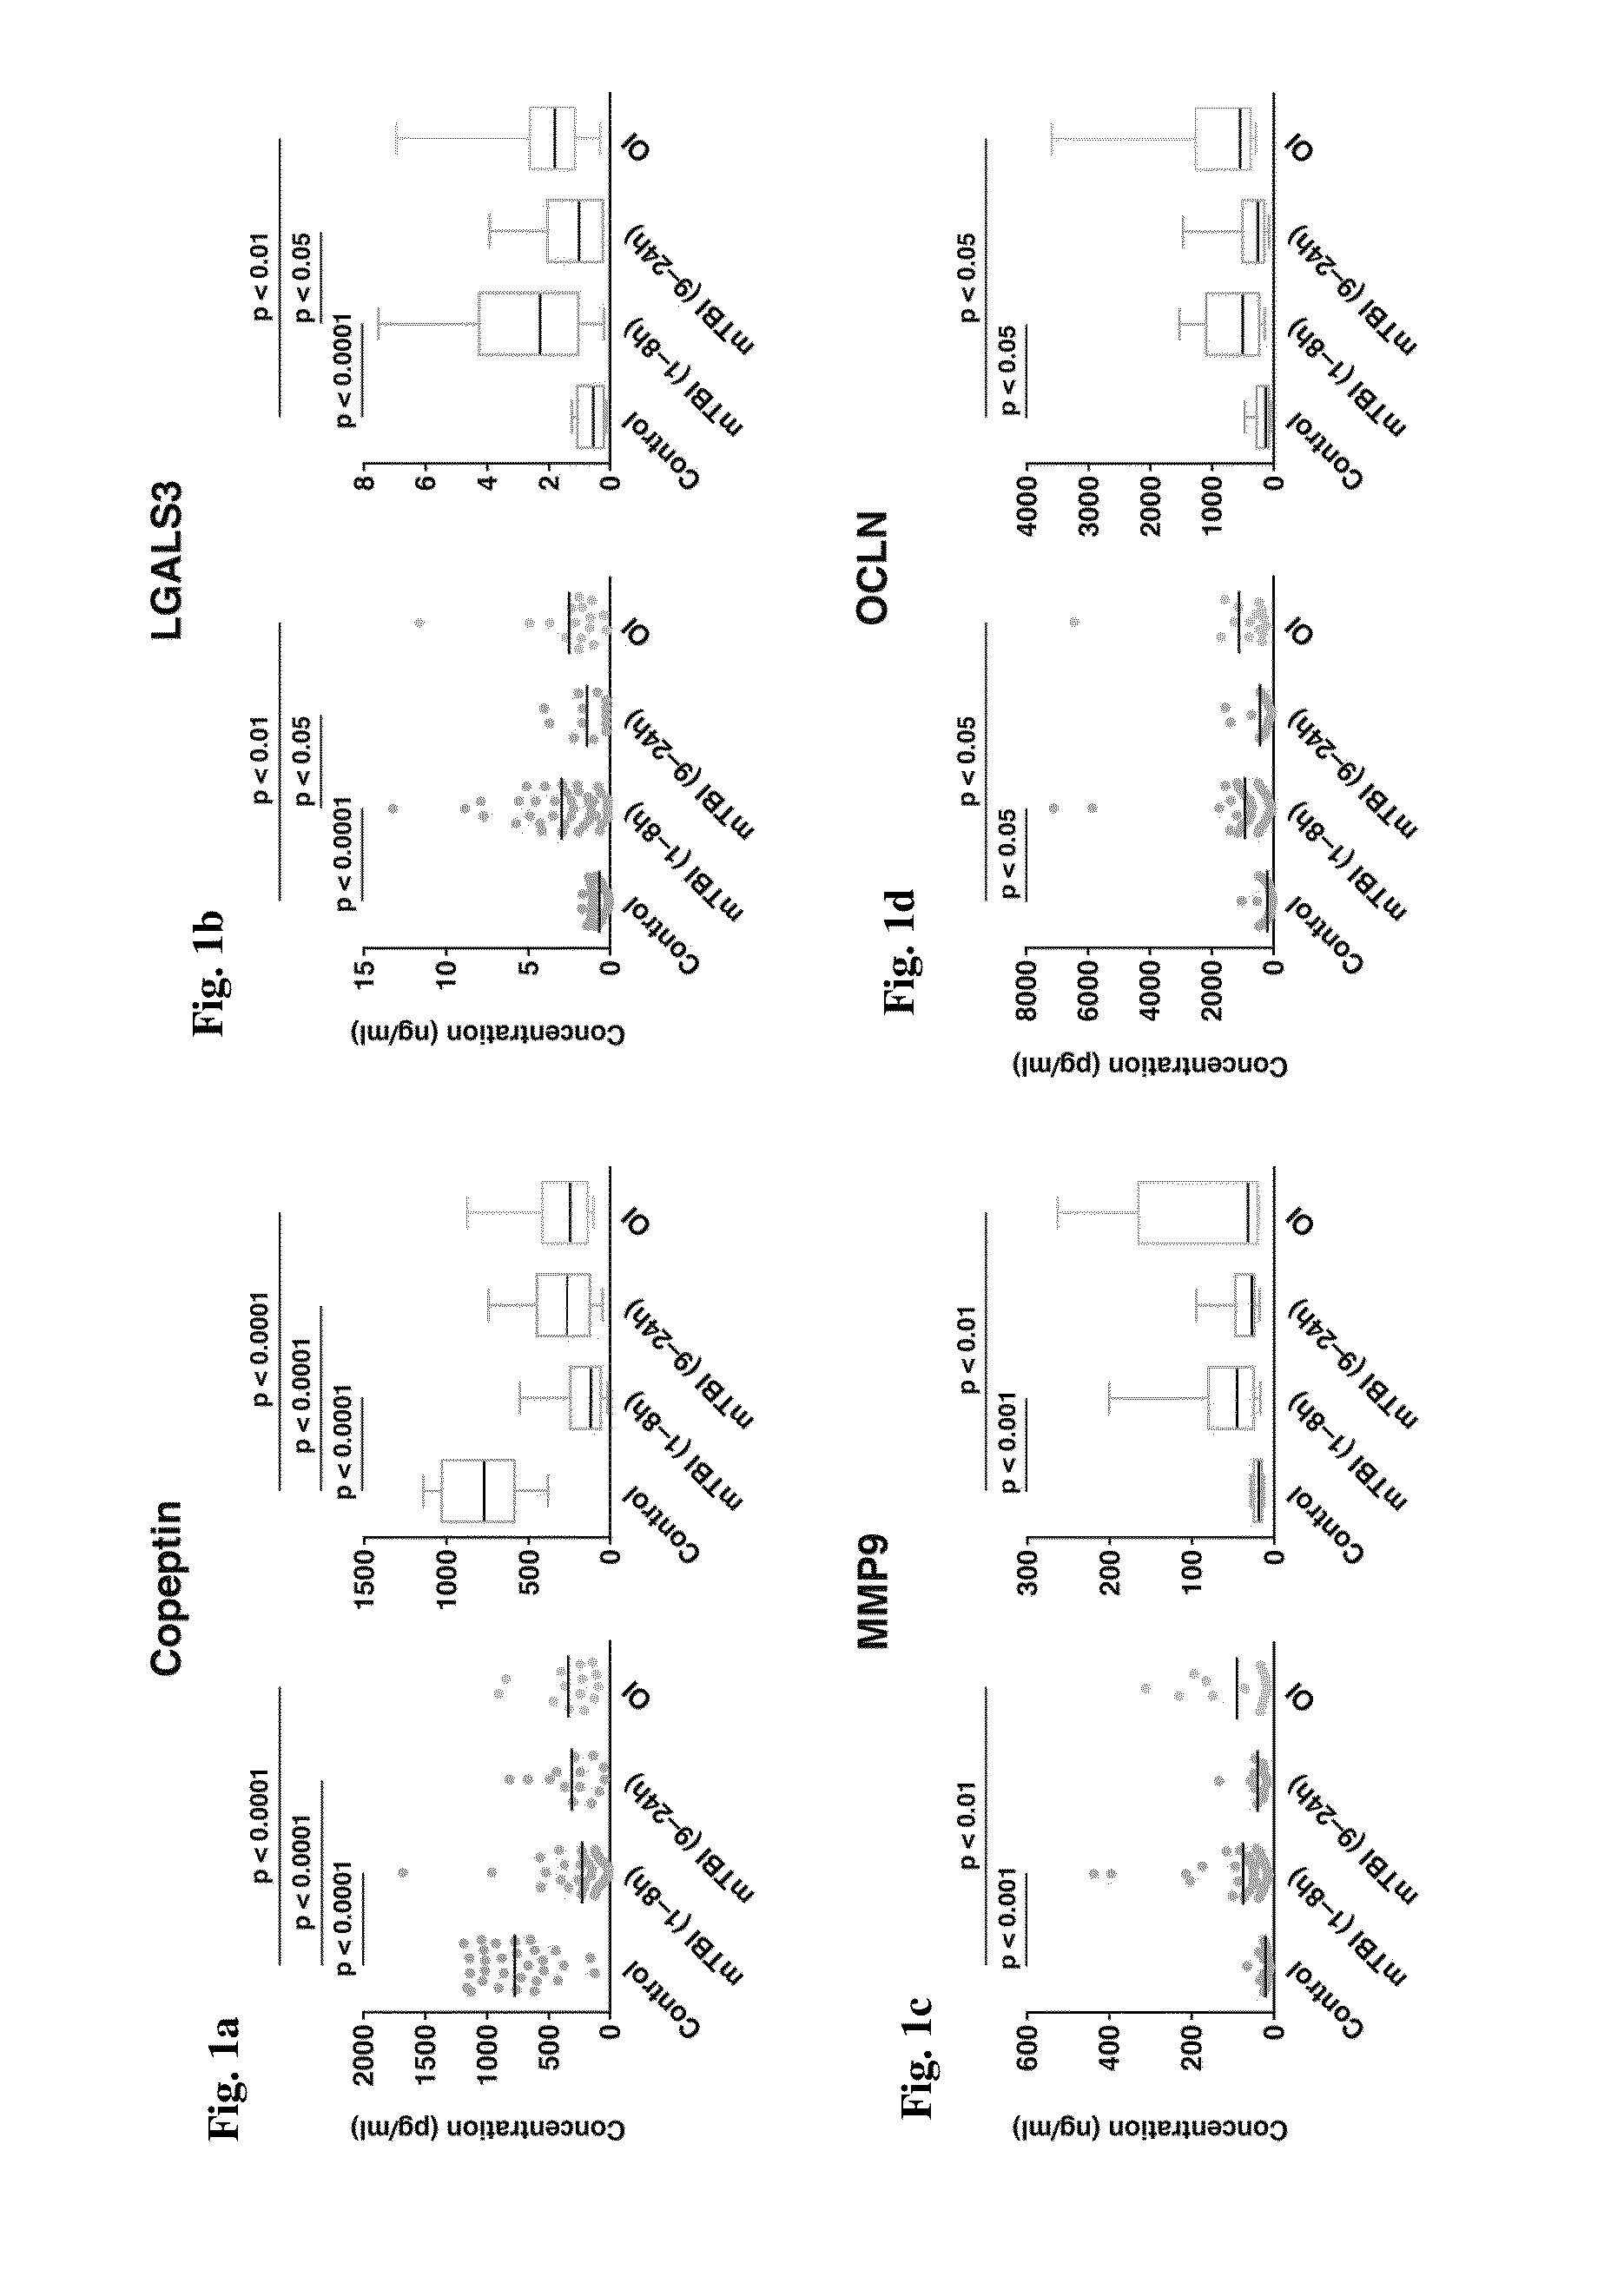 Methods for Diagnosis and Treatment of Concussion or Brain Injury